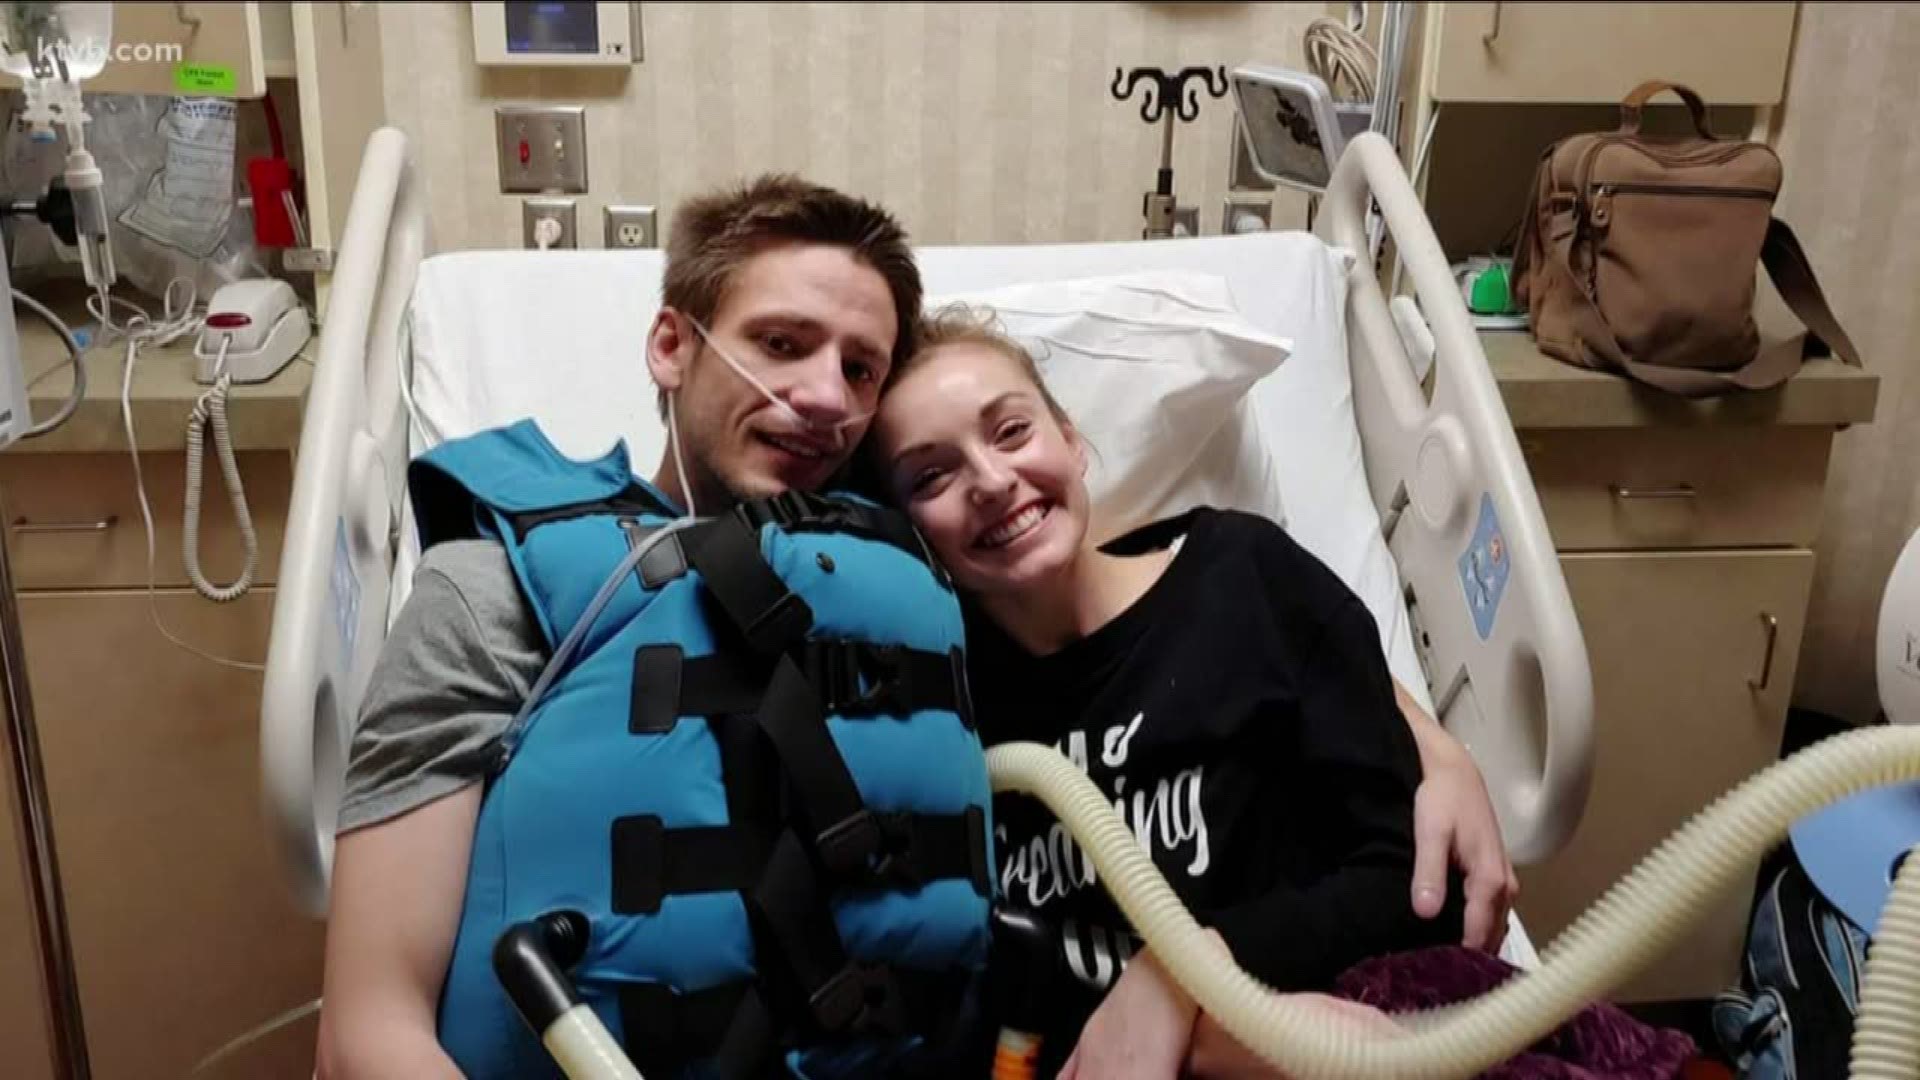 Kim Haskell, who was diagnosed with cystic fibrosis months after being born, is beating his doctors' life expectancy estimations. He was also able to find the love of his life, but it took his wife, Jaycie, some to time over her initial nervousness of the news.